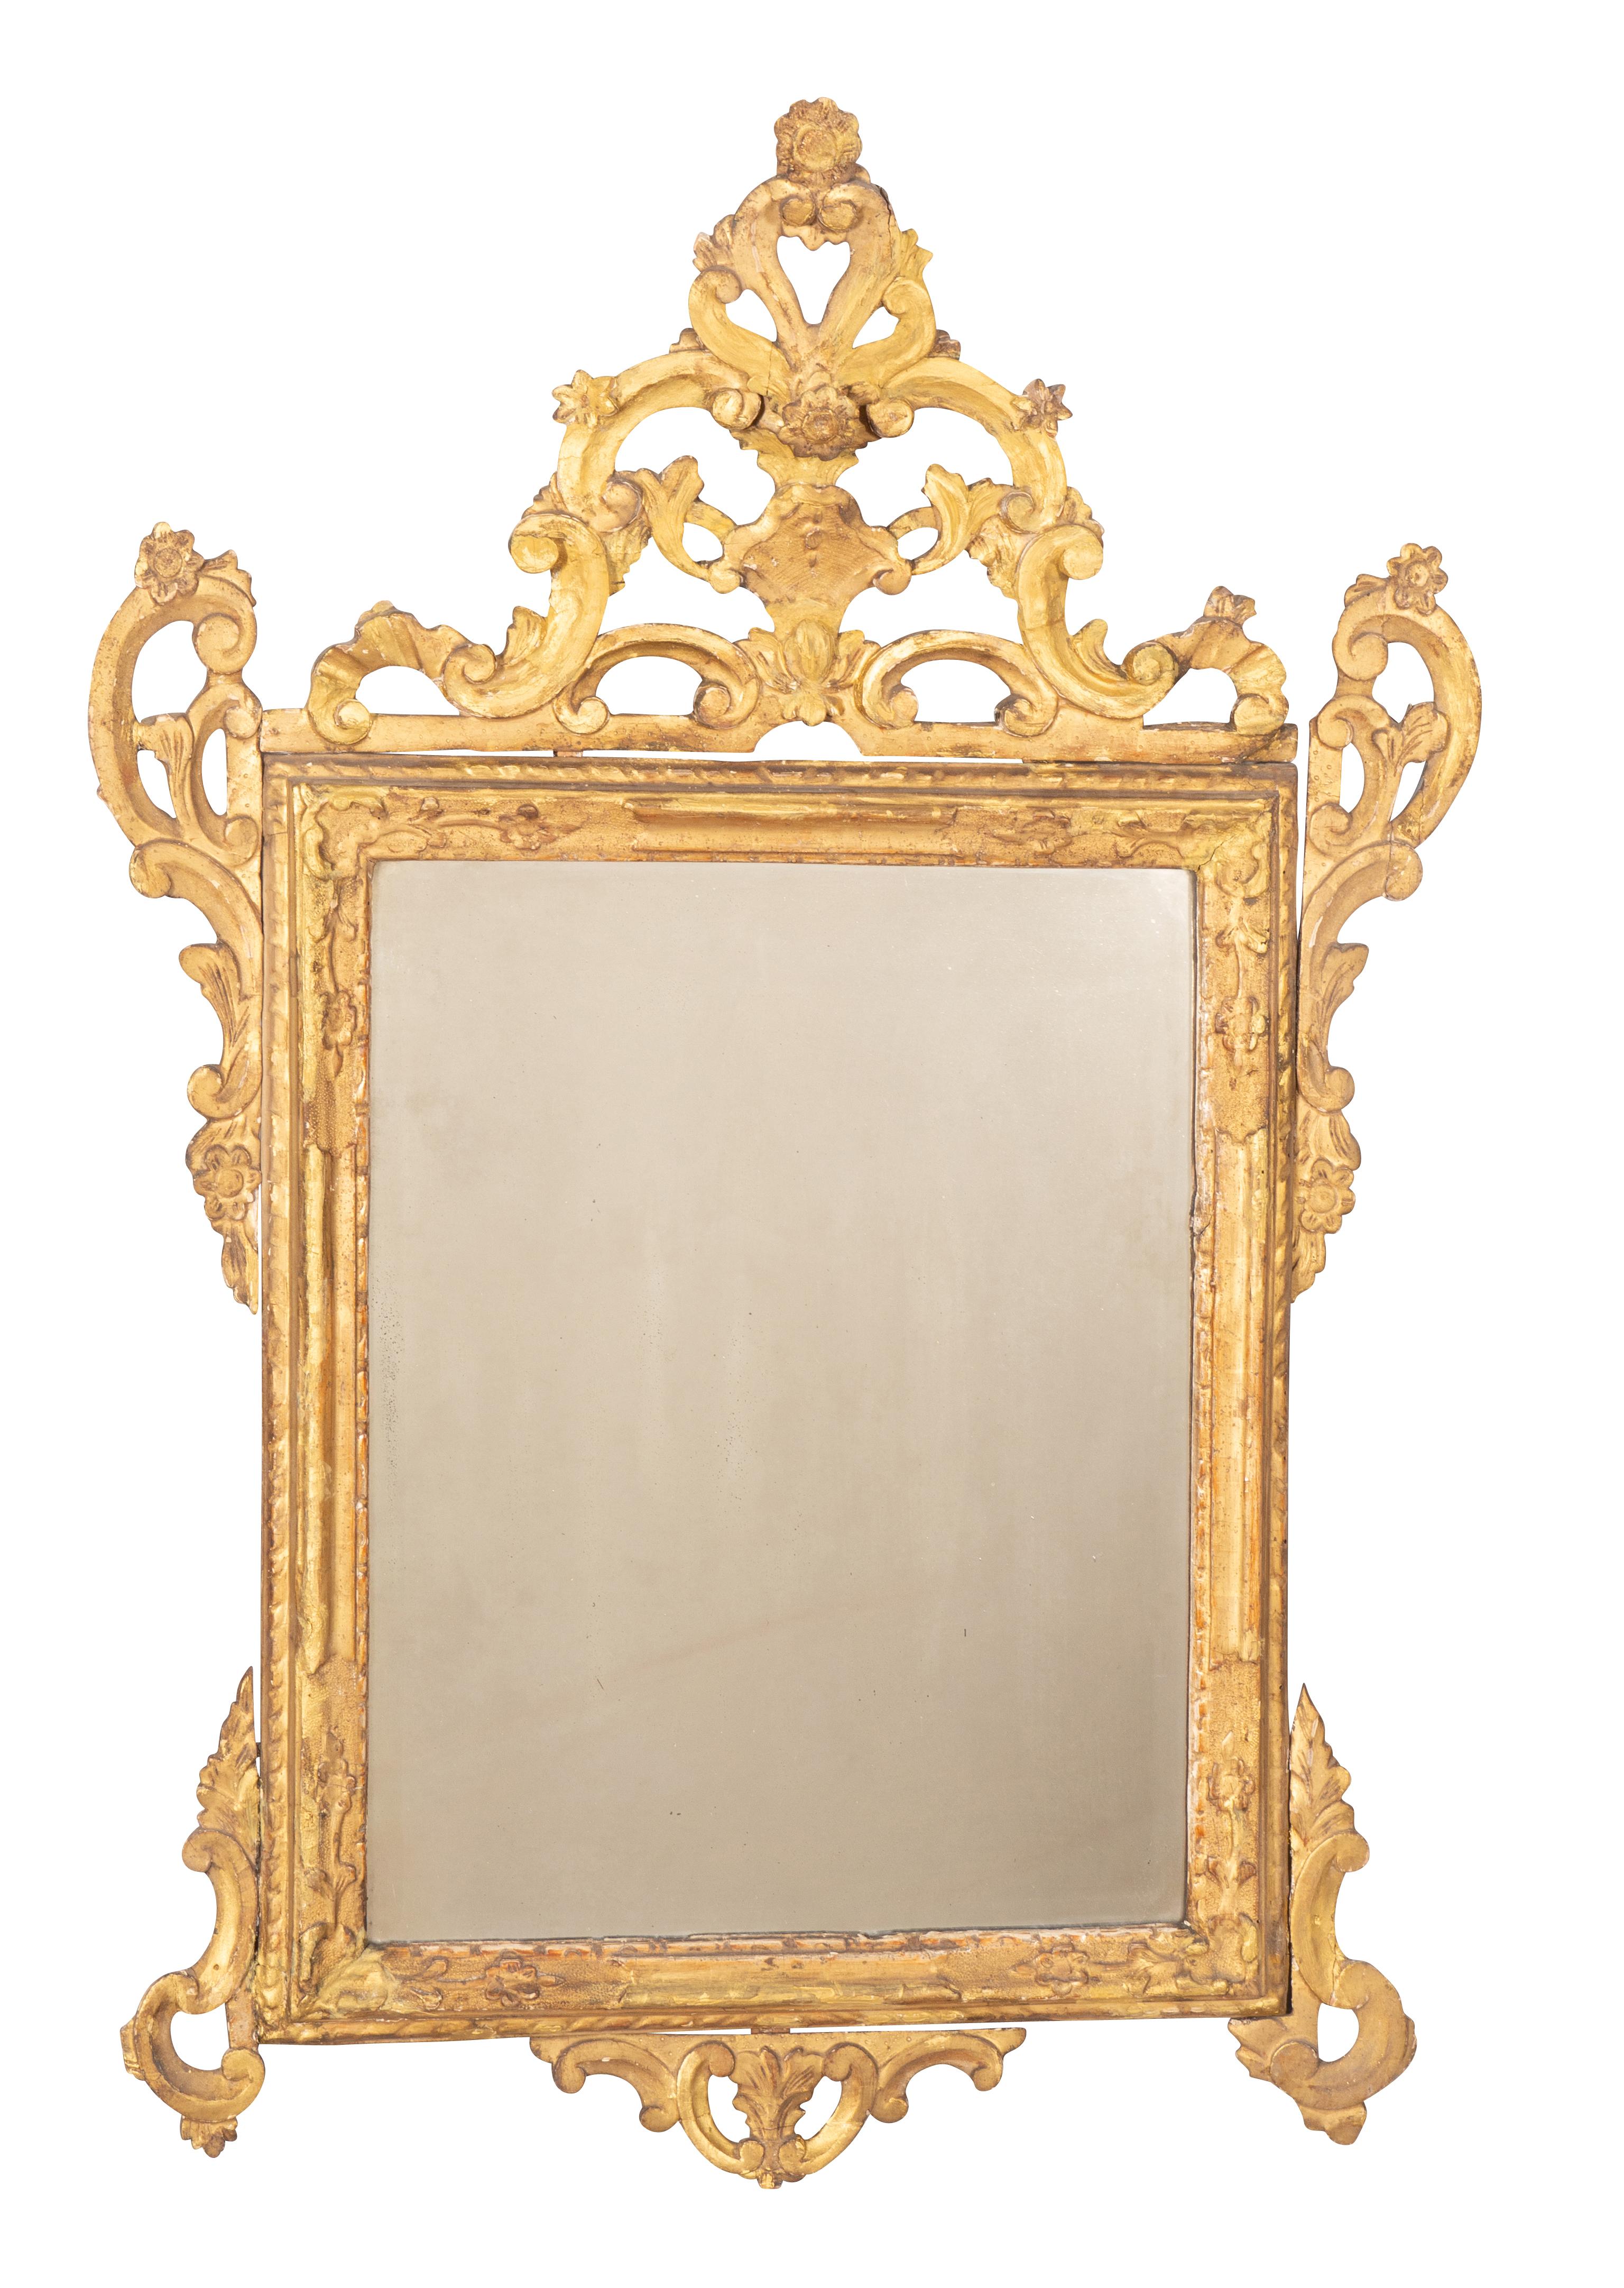 With original gilding in cleaned restored retail condition. Arched open crest with scroll and flower decoration over a mirror plate set in a conforming frame with open carved ear corners top and bottom.